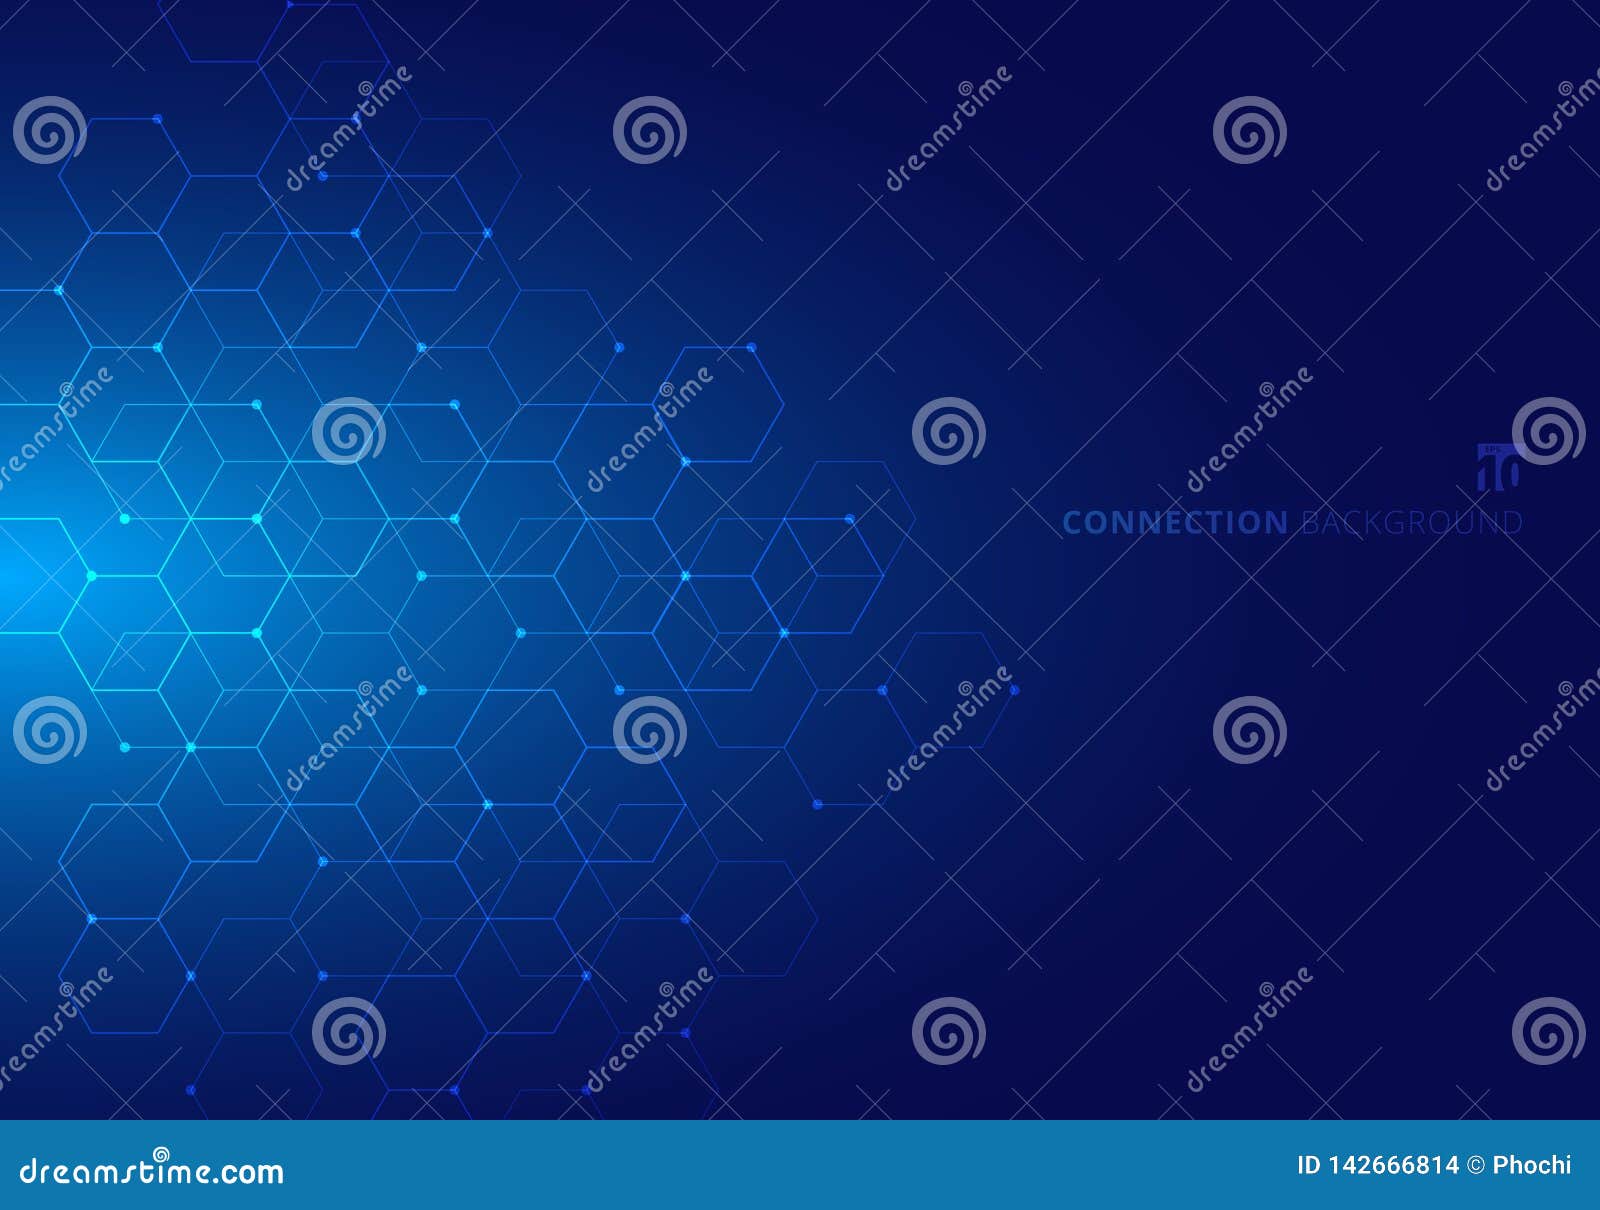 abstract hexagons with nodes digital geometric with lines and dots on blue background. technology connection concept